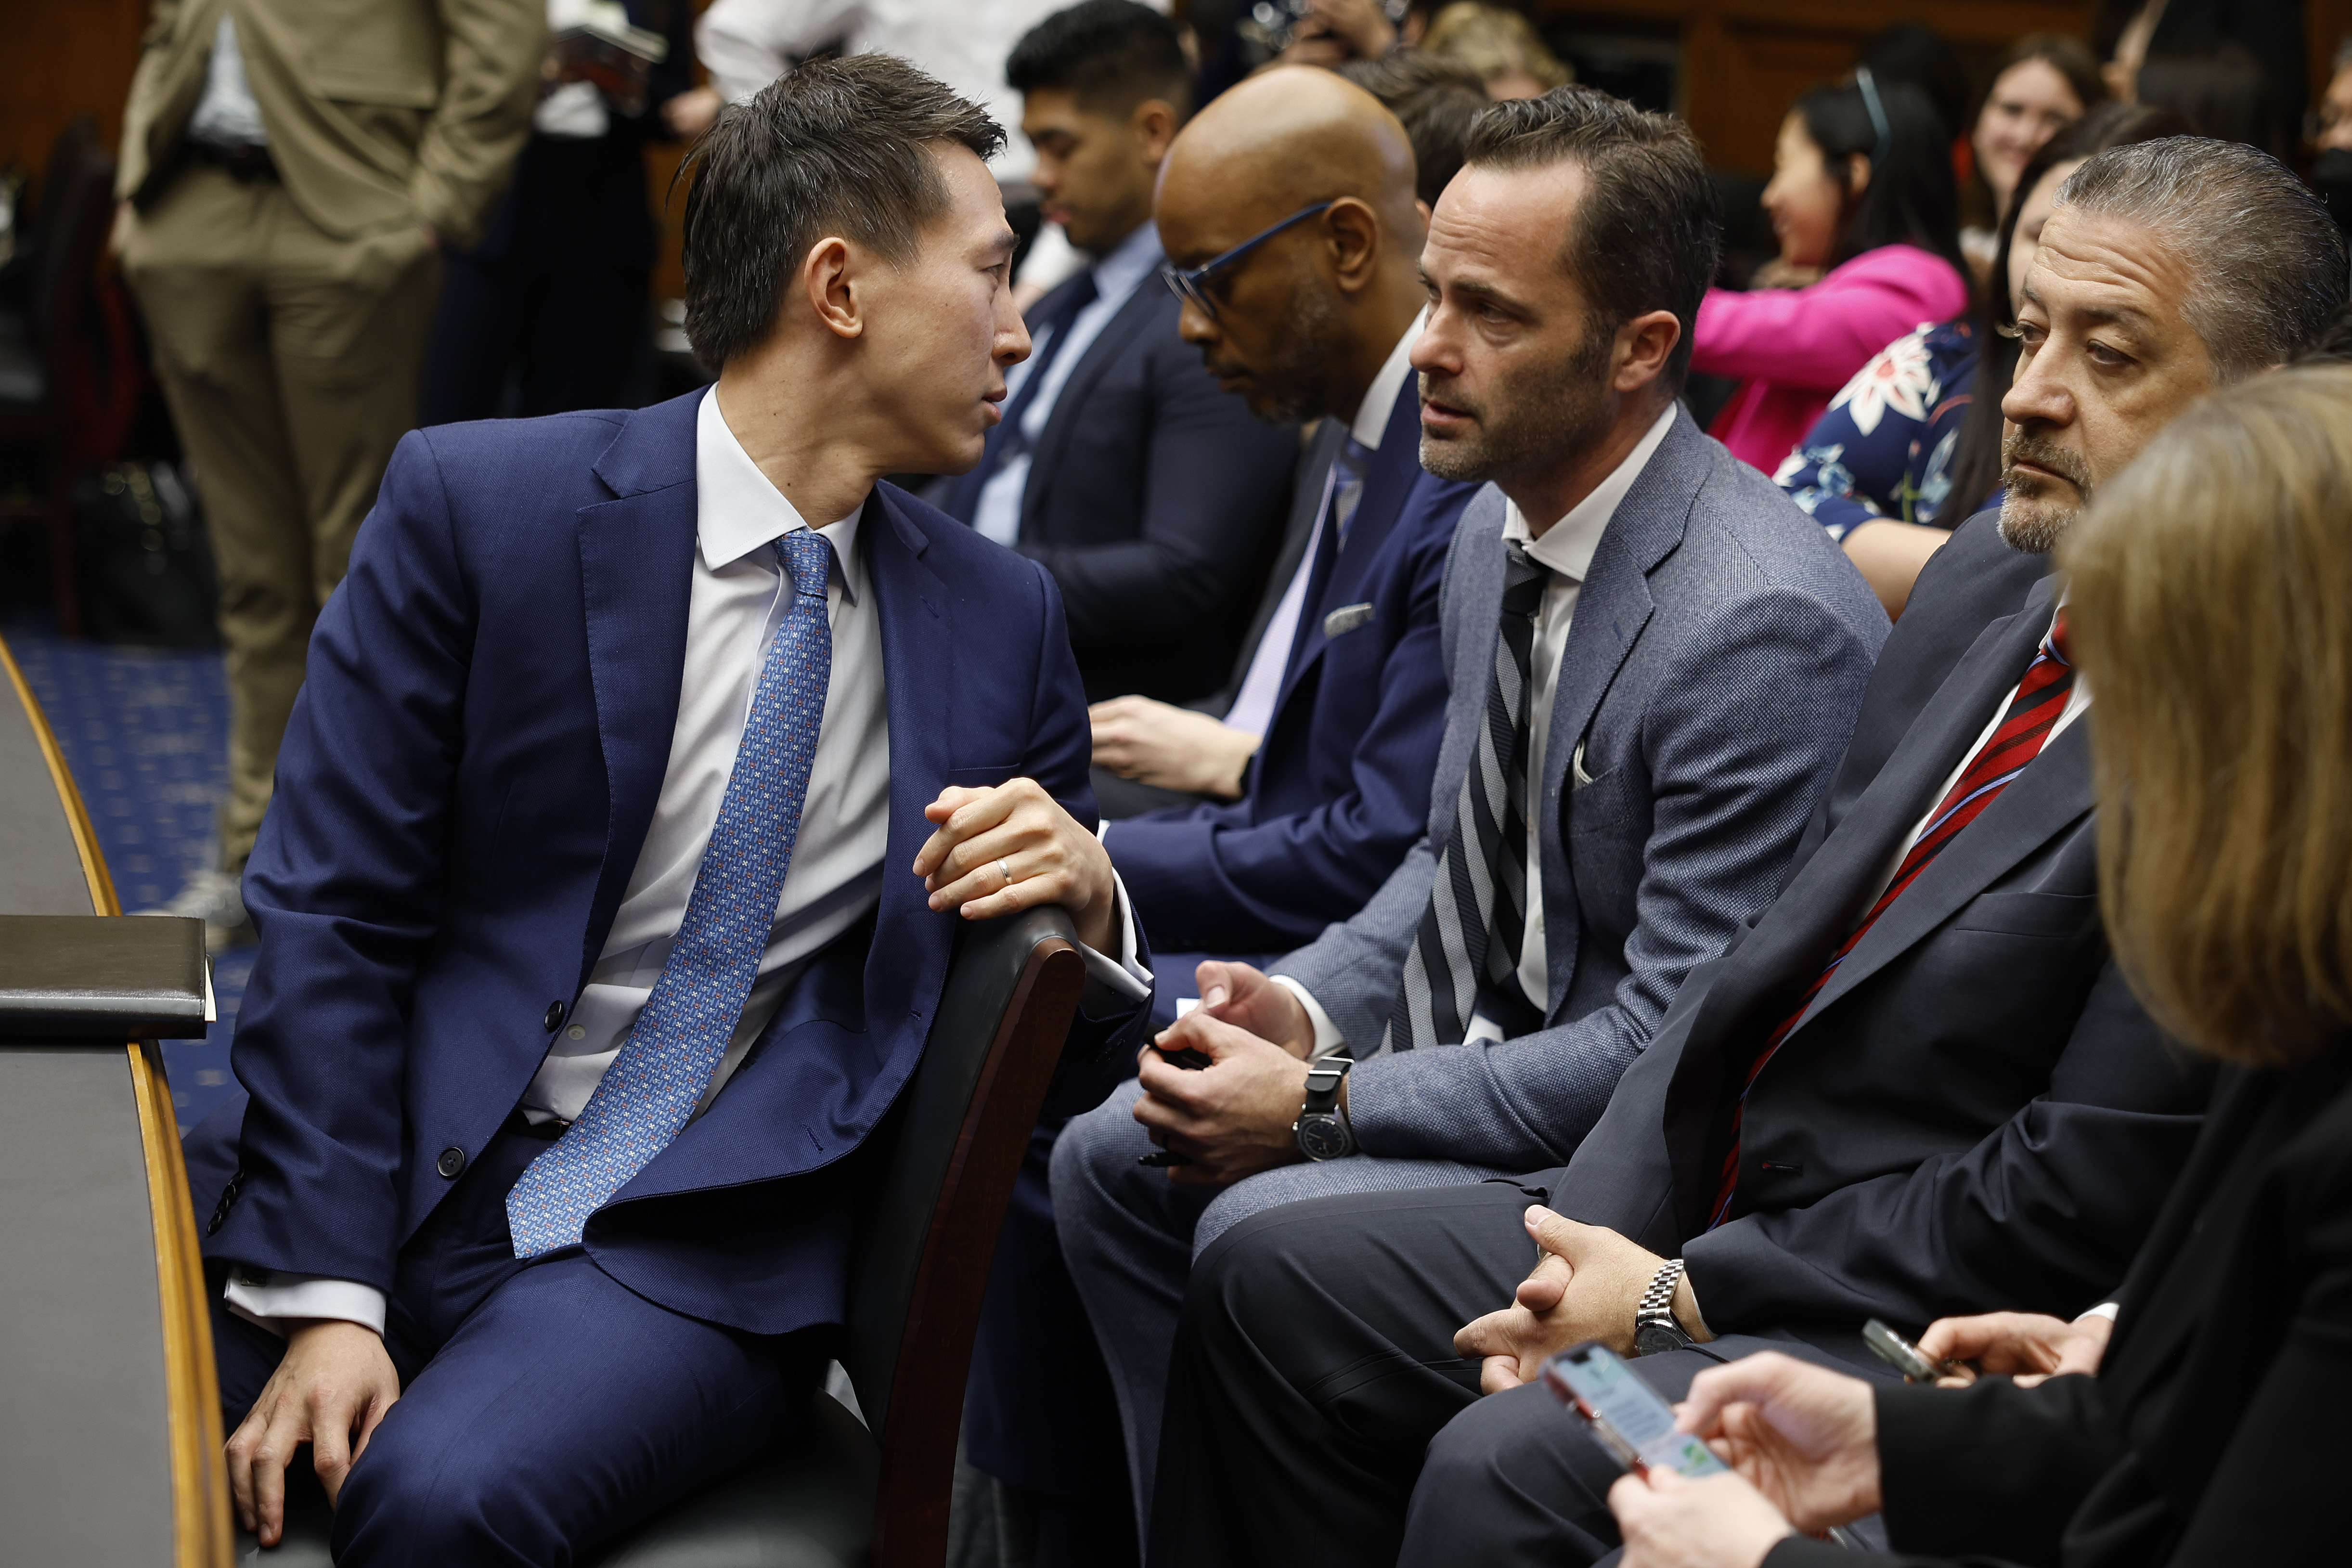 TikTok CEO Shou Zi Chew, left, speaks with Michael Beckerman, a former congressional aide who the social media company enlisted to take a leading role in building a Washington influence machine.